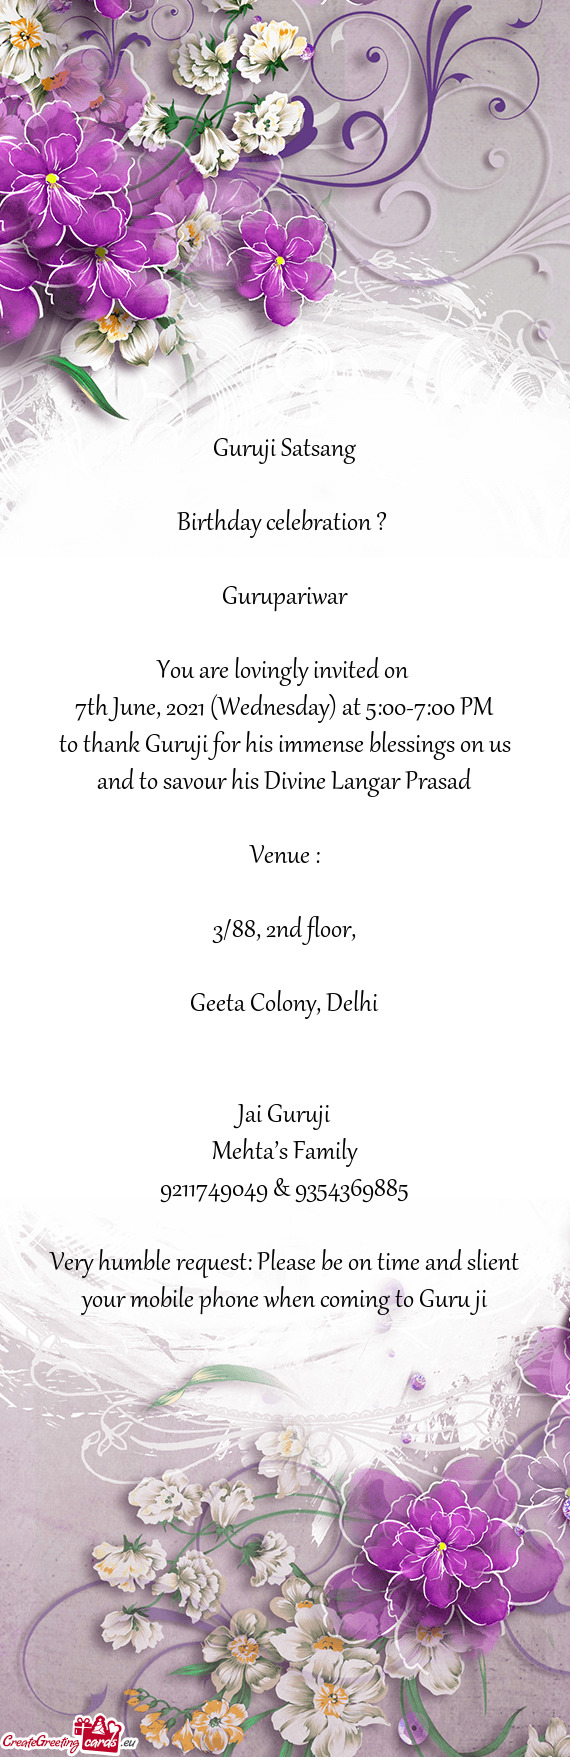 7th June, 2021 (Wednesday) at 5:00-7:00 PM